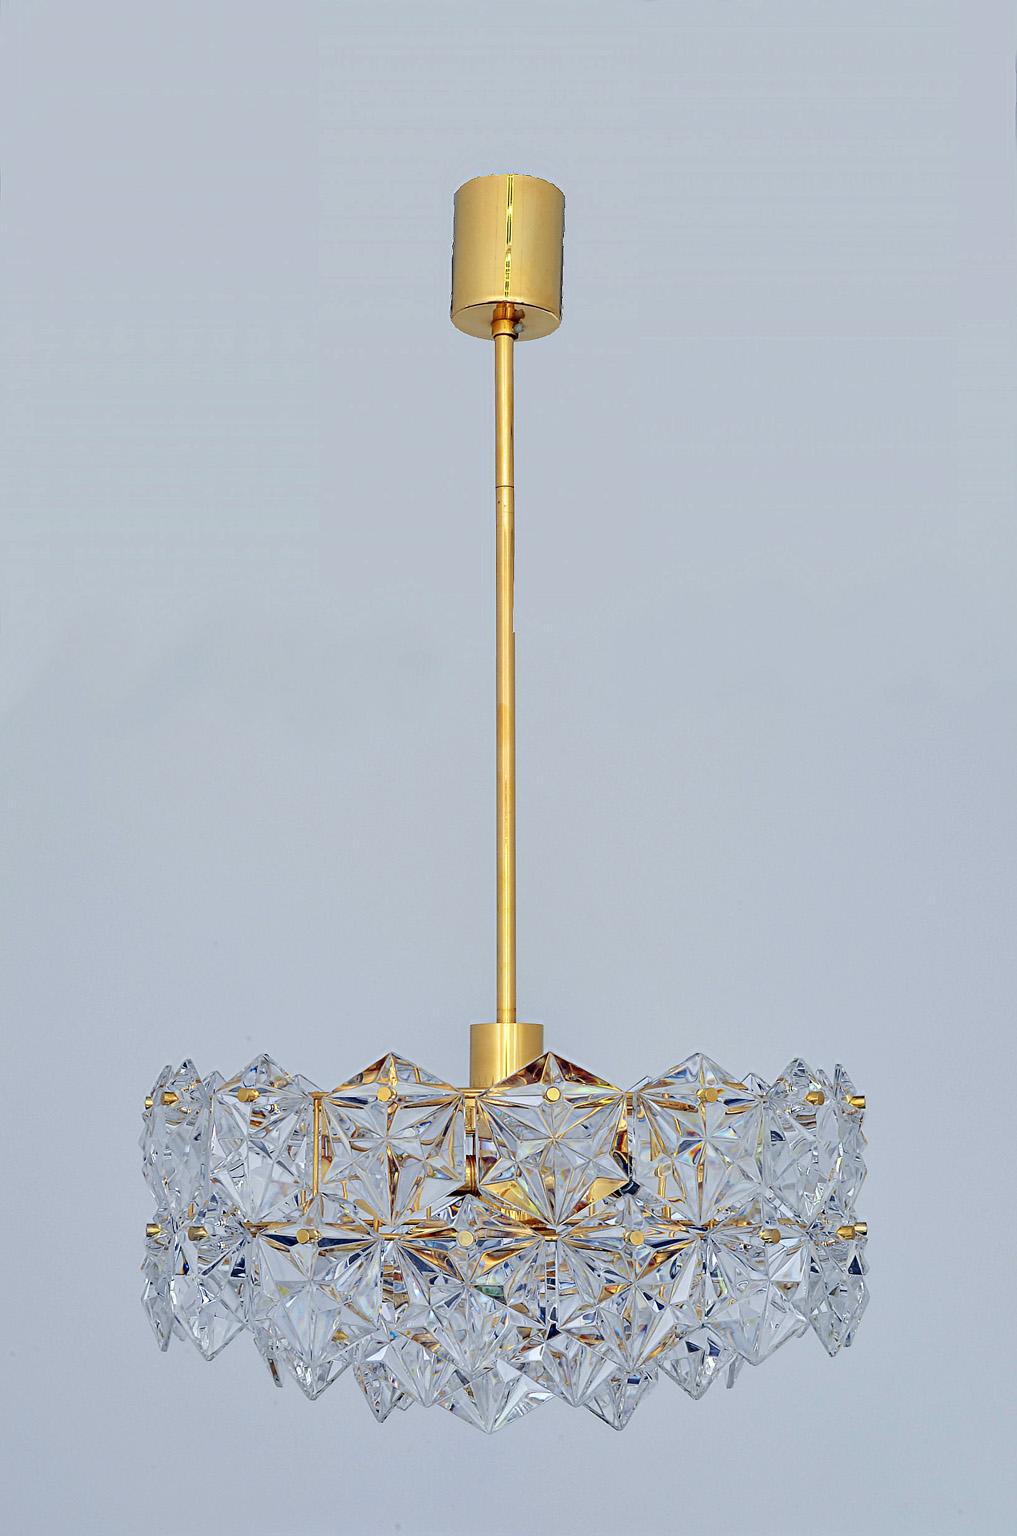 This pendant chandelier in faceted crystal and gilt brass was produced by Kinkeldey Germany in the 1970s.
Three-tiered and featured with 46 crystals.